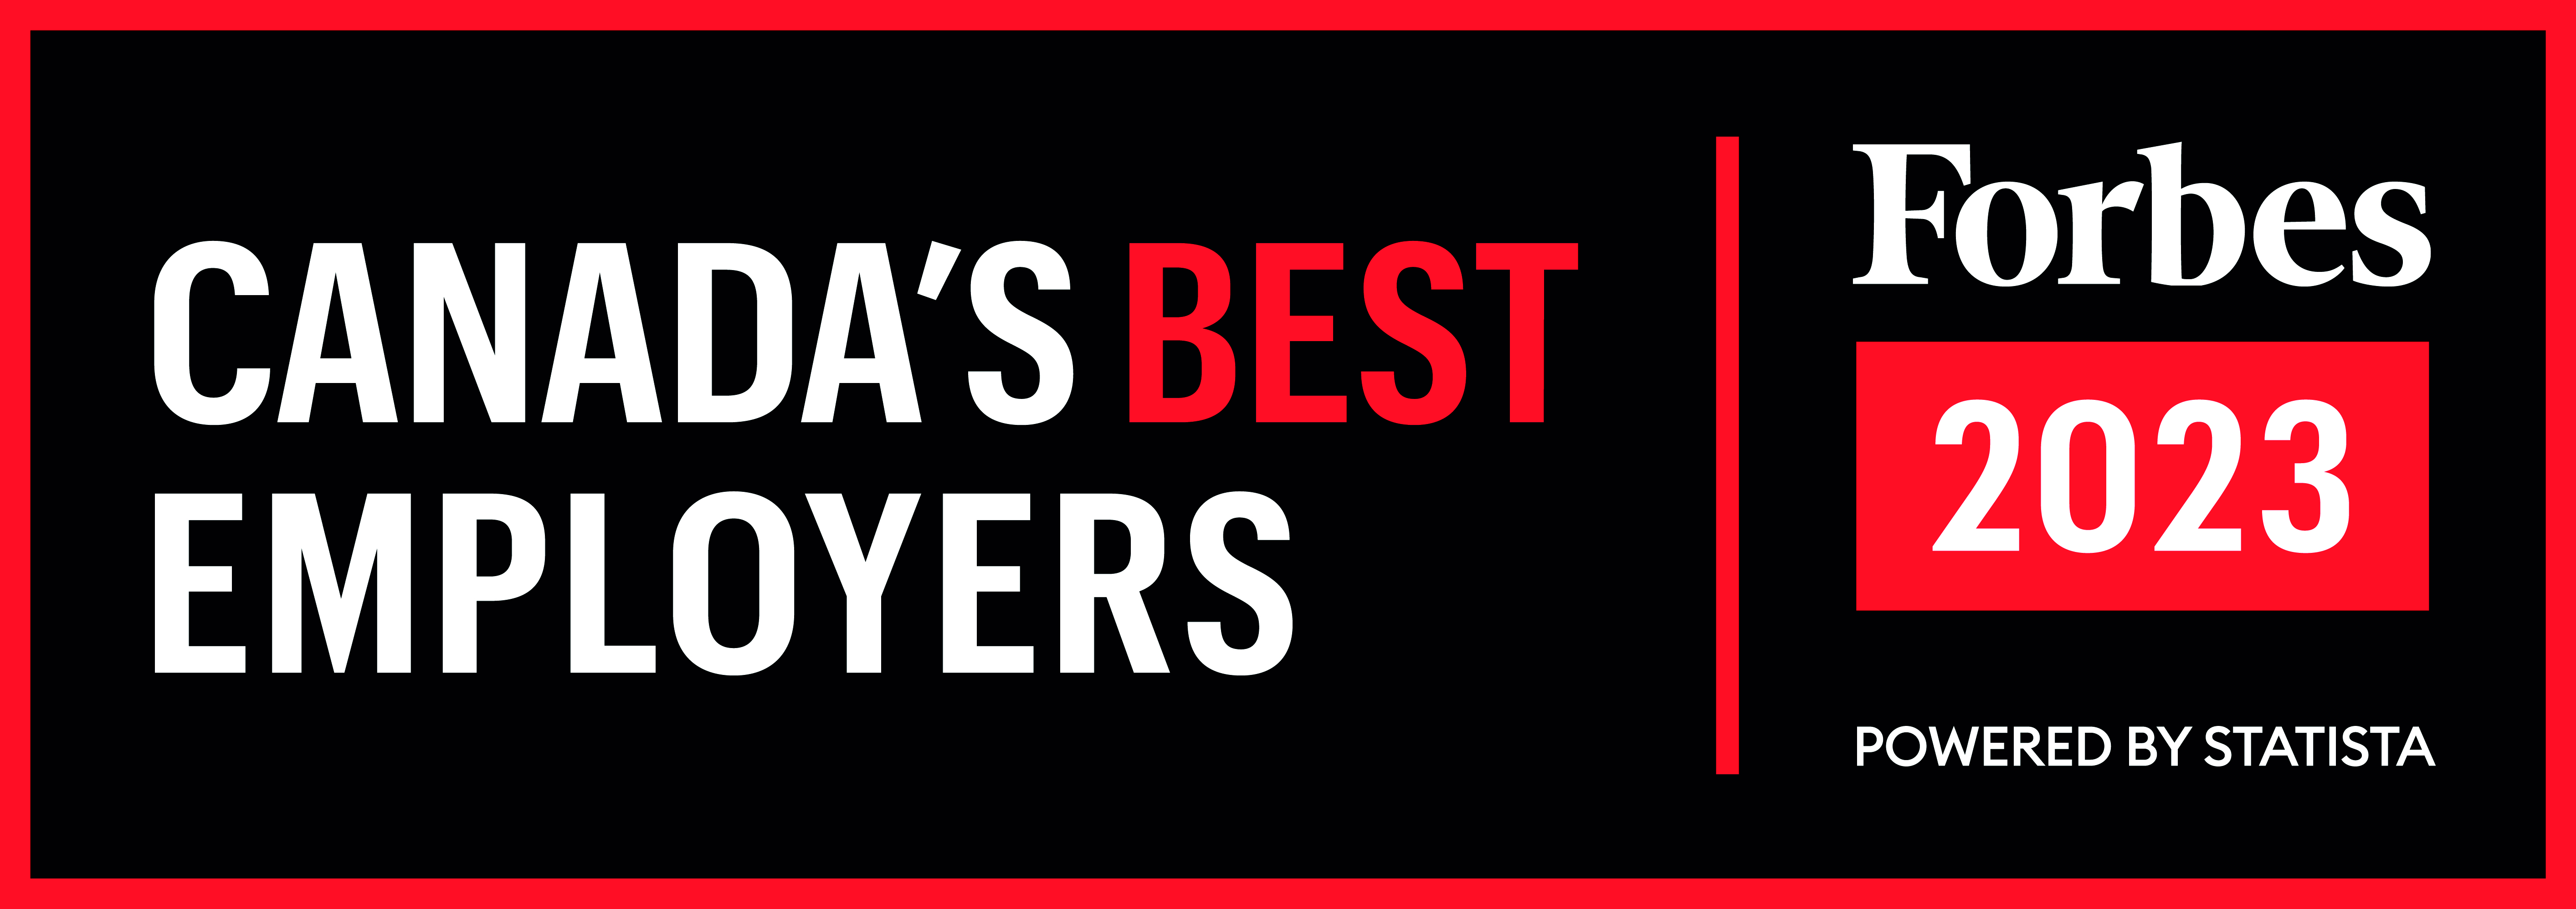 Logo - black background red text that reads "Forbes Canada's Best Employers 2023"